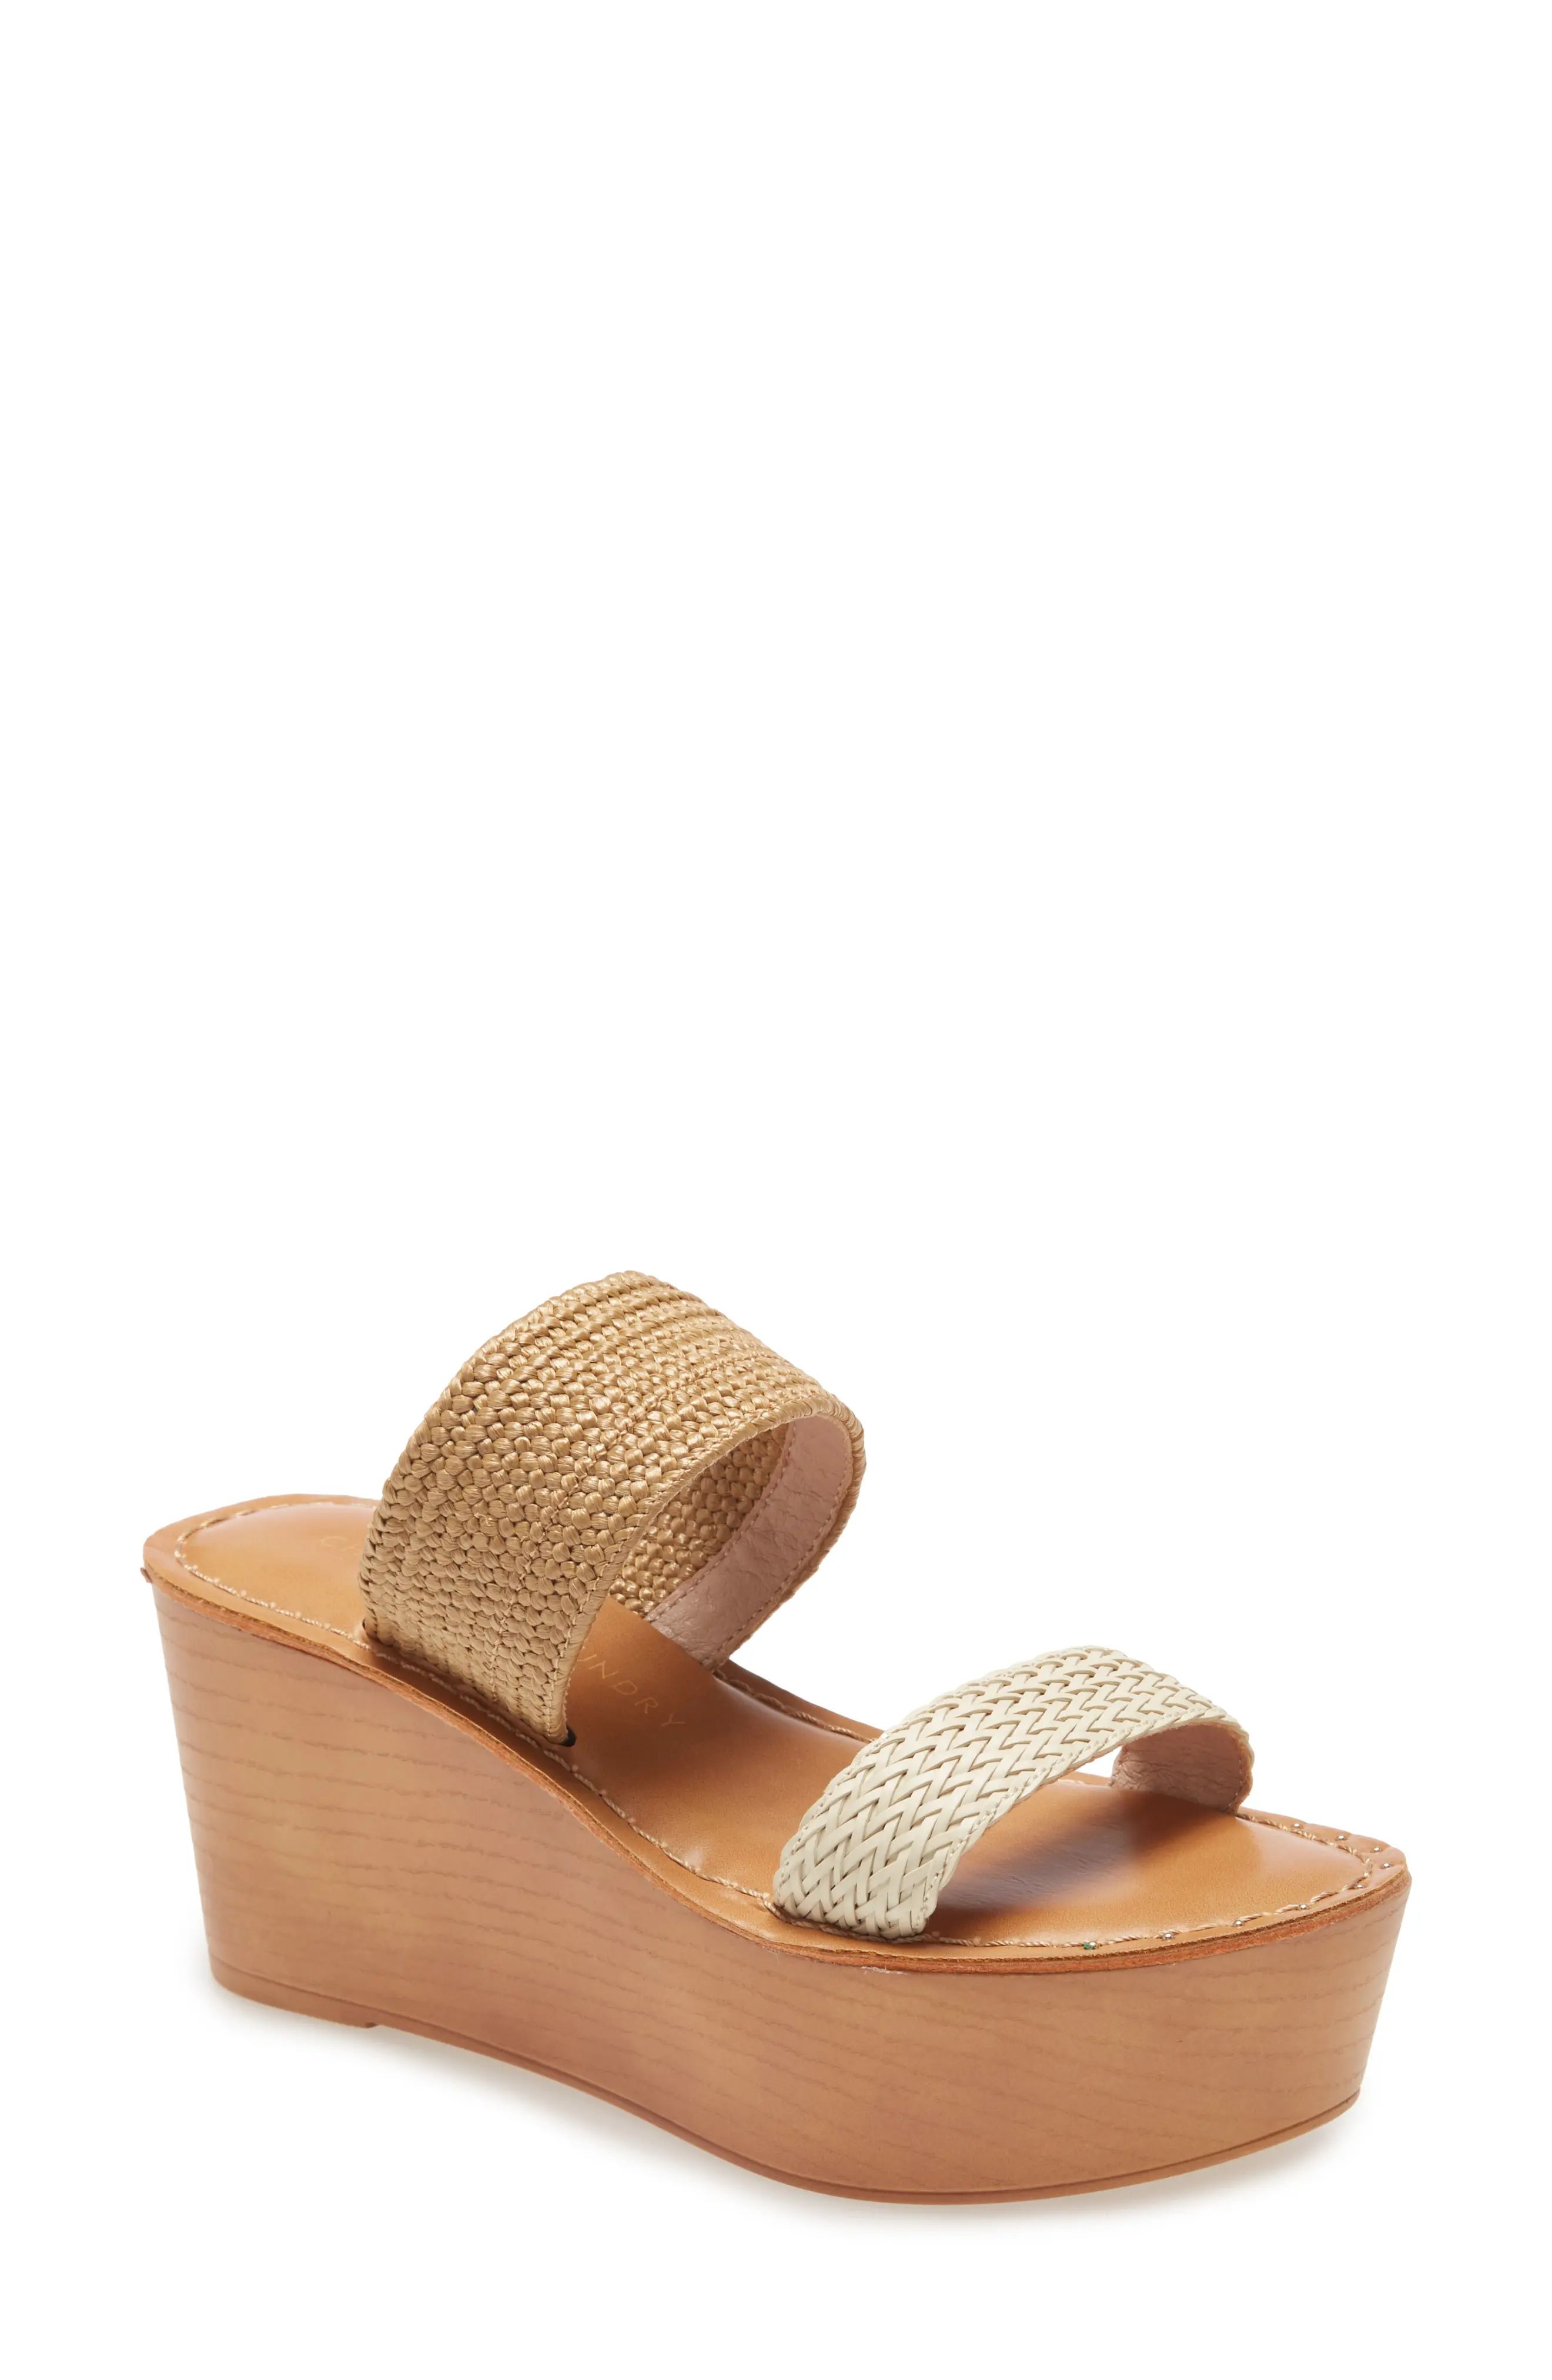 Women's Chinese Laundry Wind Wedge Sandal, Size 5 M - Beige | Nordstrom